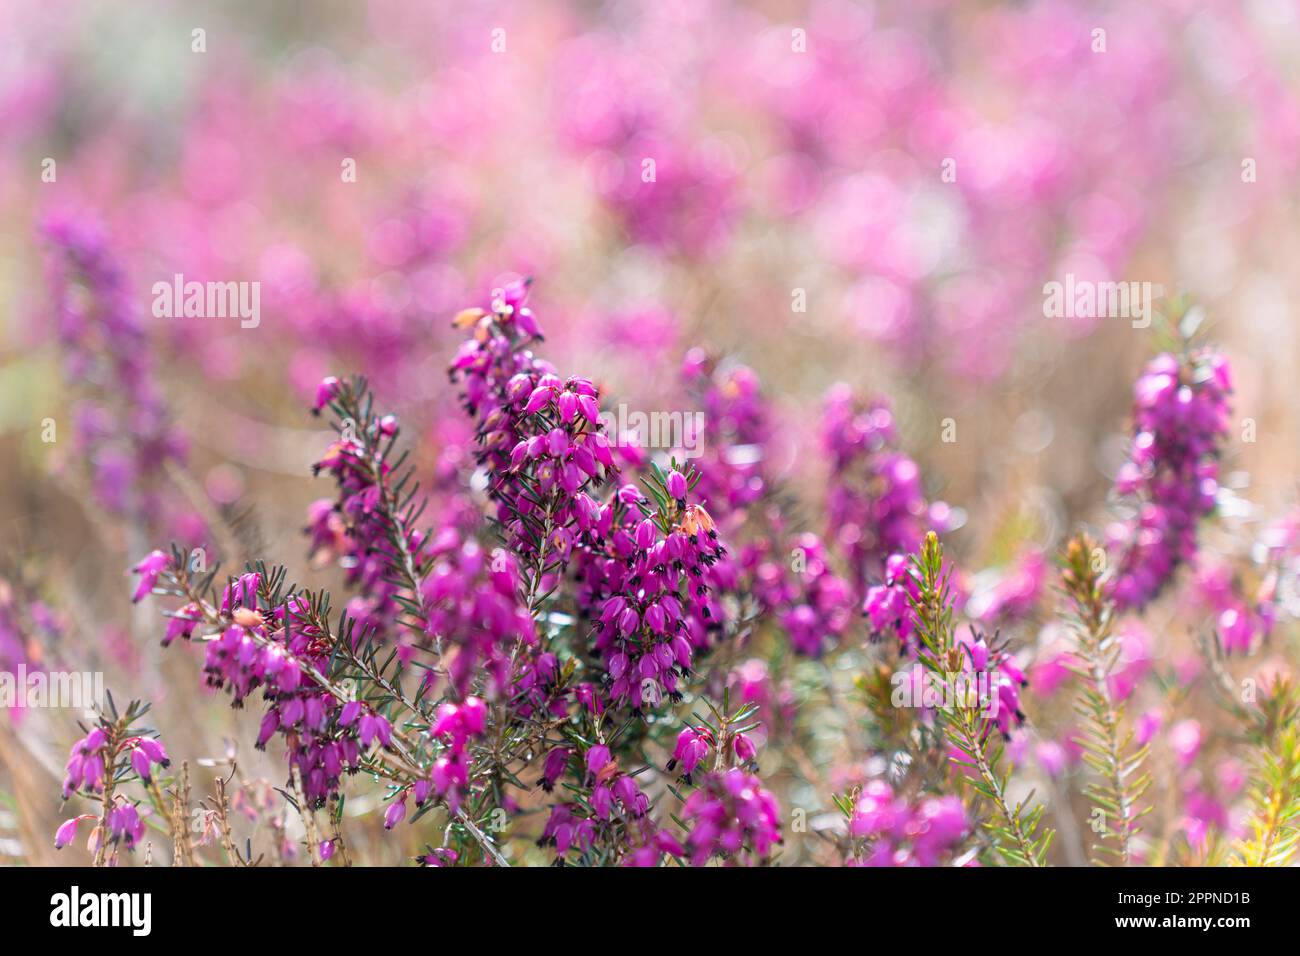 Calluna vulgaris, common heather, ling, or simply heather during blooming, selective focus. Stock Photo